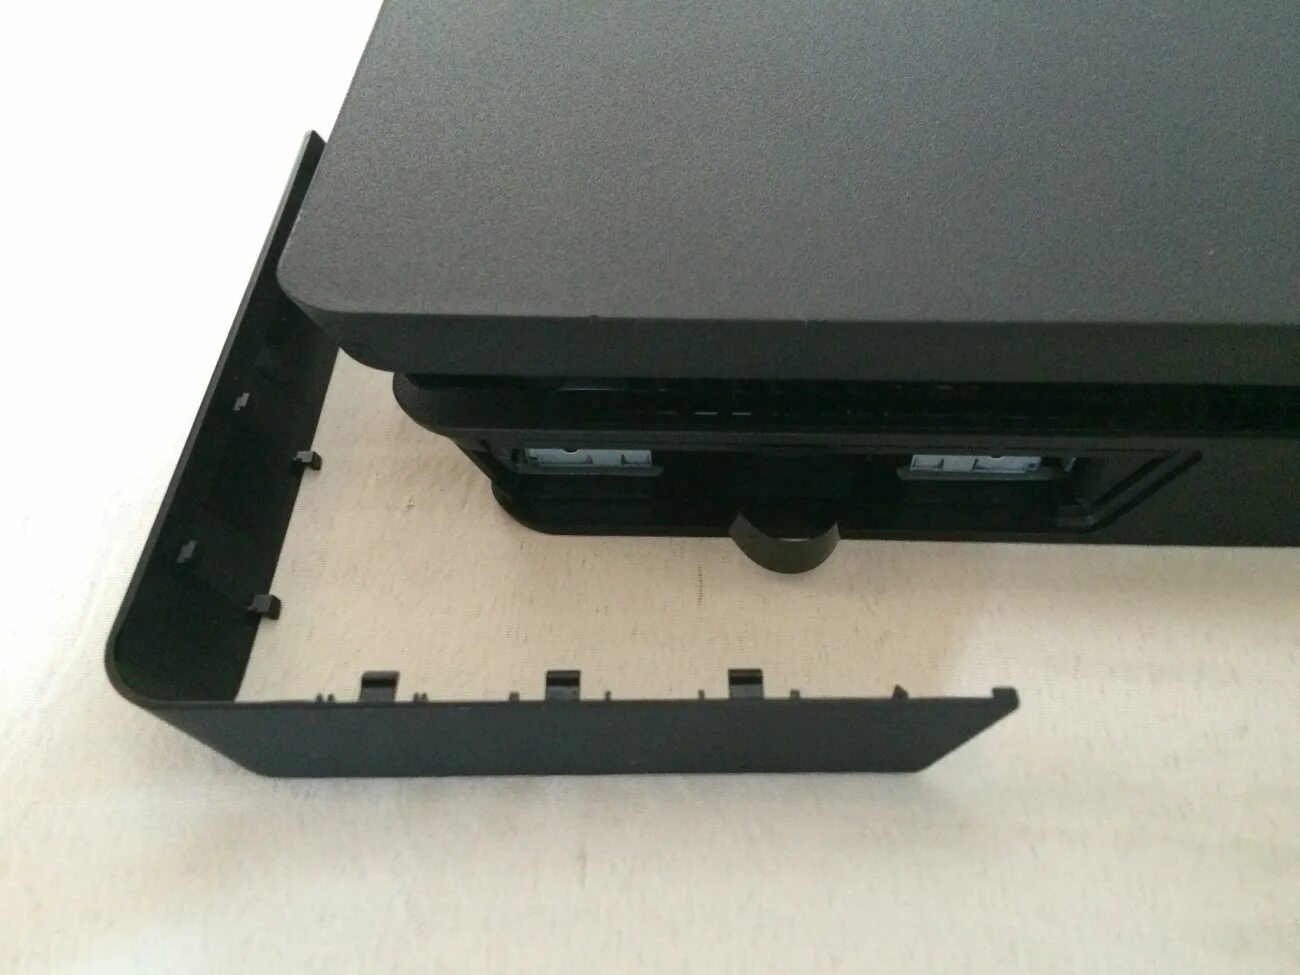 Ps4 Slim HDD. Aux ps4 Slim. PS 4 Slim с дисками. Ps4 Slim HDD remove.